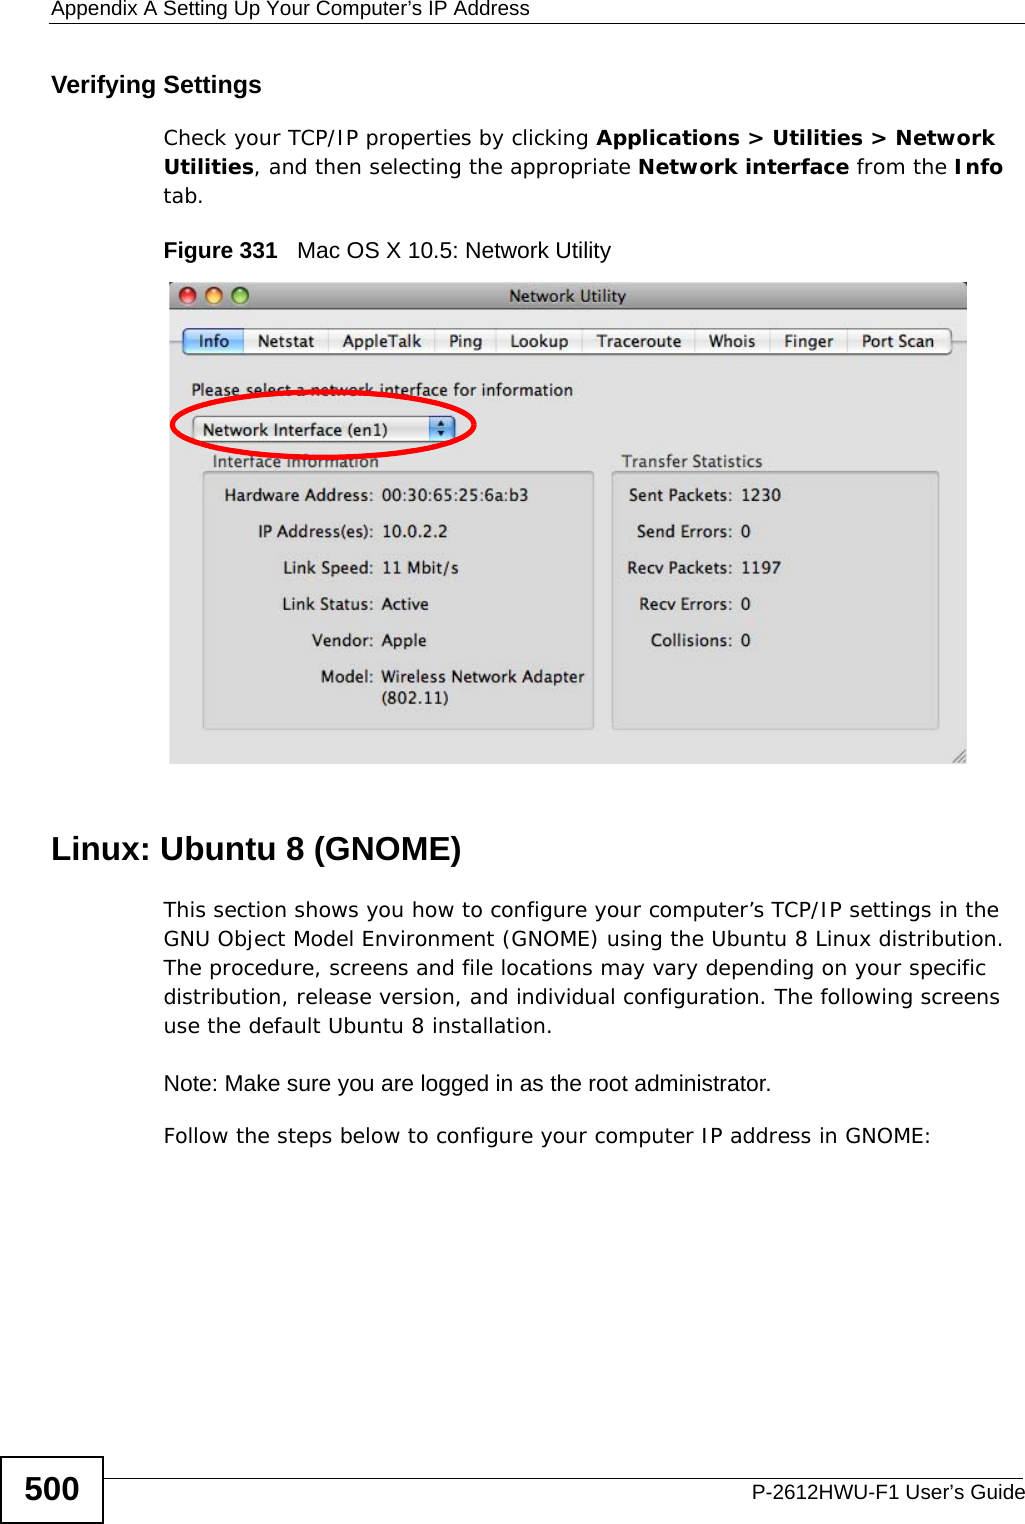 Appendix A Setting Up Your Computer’s IP AddressP-2612HWU-F1 User’s Guide500Verifying SettingsCheck your TCP/IP properties by clicking Applications &gt; Utilities &gt; Network Utilities, and then selecting the appropriate Network interface from the Info tab.Figure 331   Mac OS X 10.5: Network UtilityLinux: Ubuntu 8 (GNOME)This section shows you how to configure your computer’s TCP/IP settings in the GNU Object Model Environment (GNOME) using the Ubuntu 8 Linux distribution. The procedure, screens and file locations may vary depending on your specific distribution, release version, and individual configuration. The following screens use the default Ubuntu 8 installation.Note: Make sure you are logged in as the root administrator. Follow the steps below to configure your computer IP address in GNOME: 